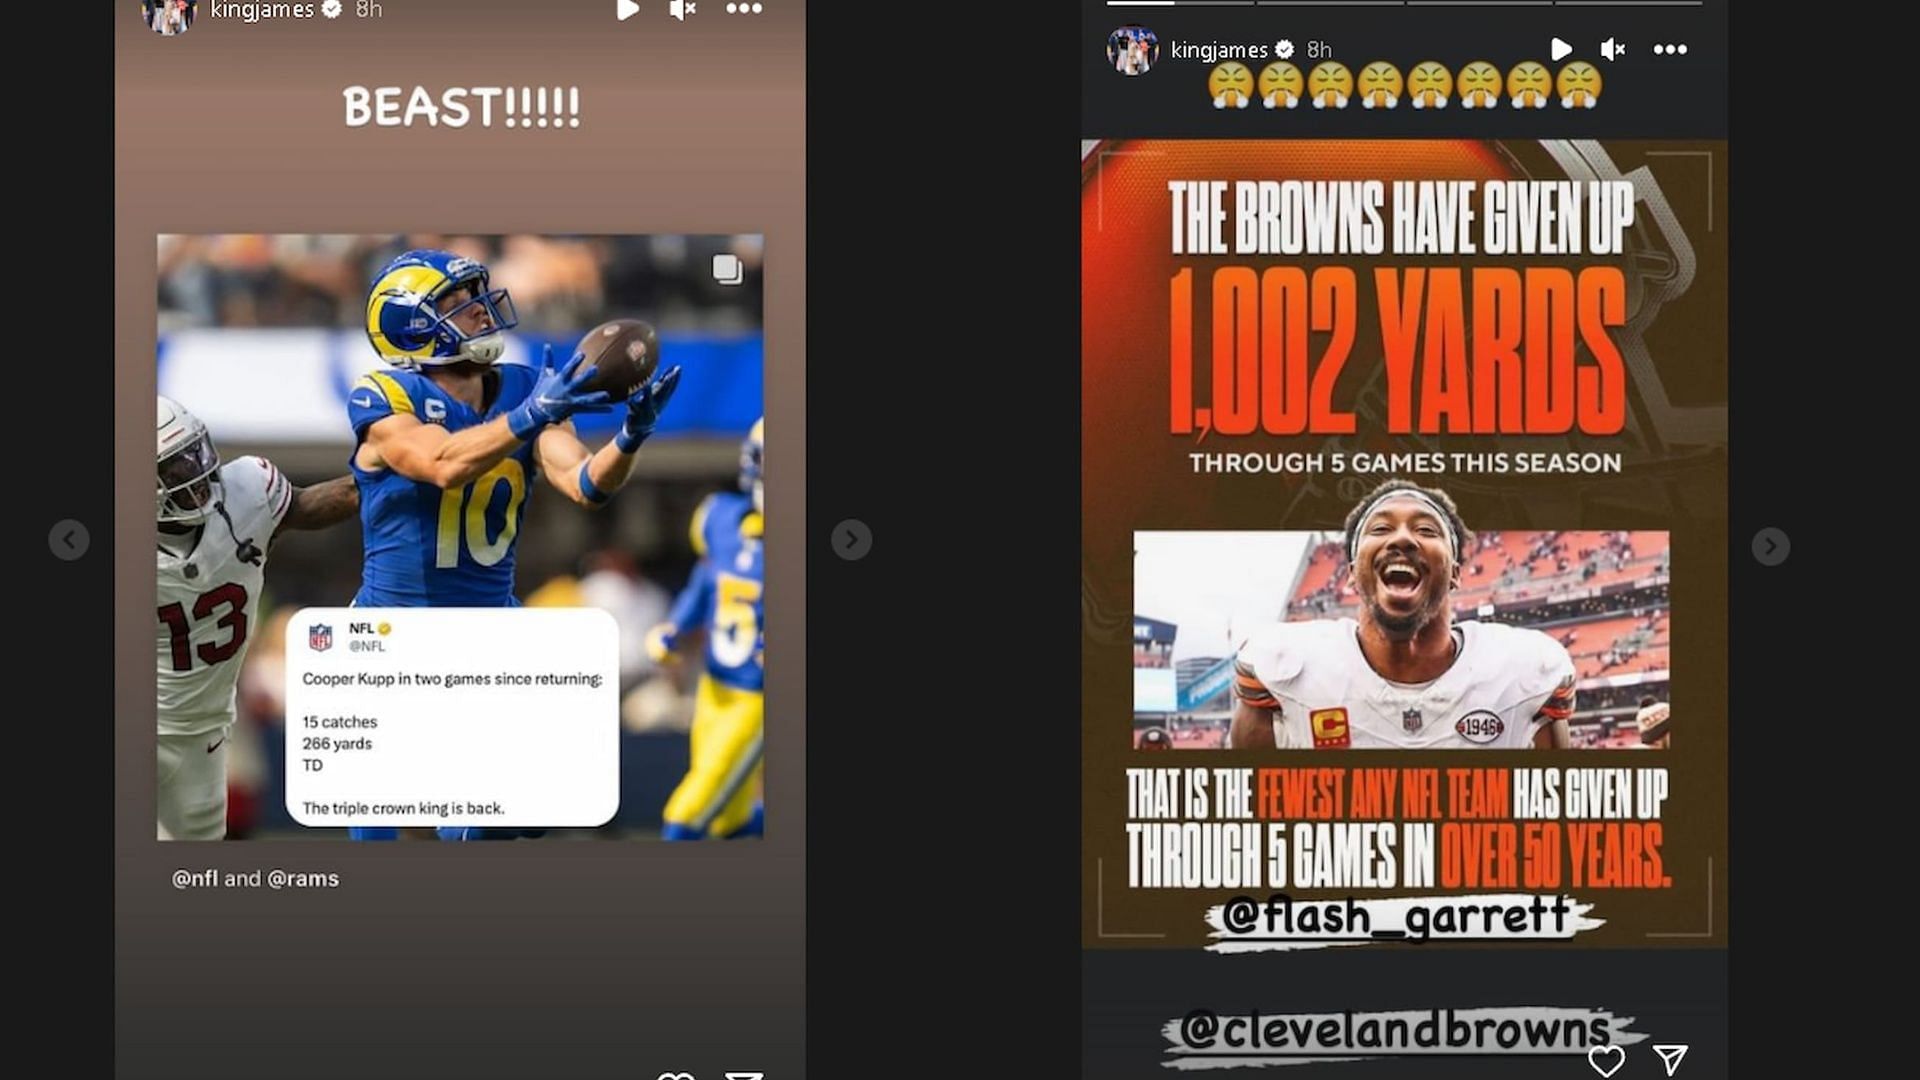 LeBron posted these stories, one about Cooper Kupp and the other about the Cleveland Browns defense